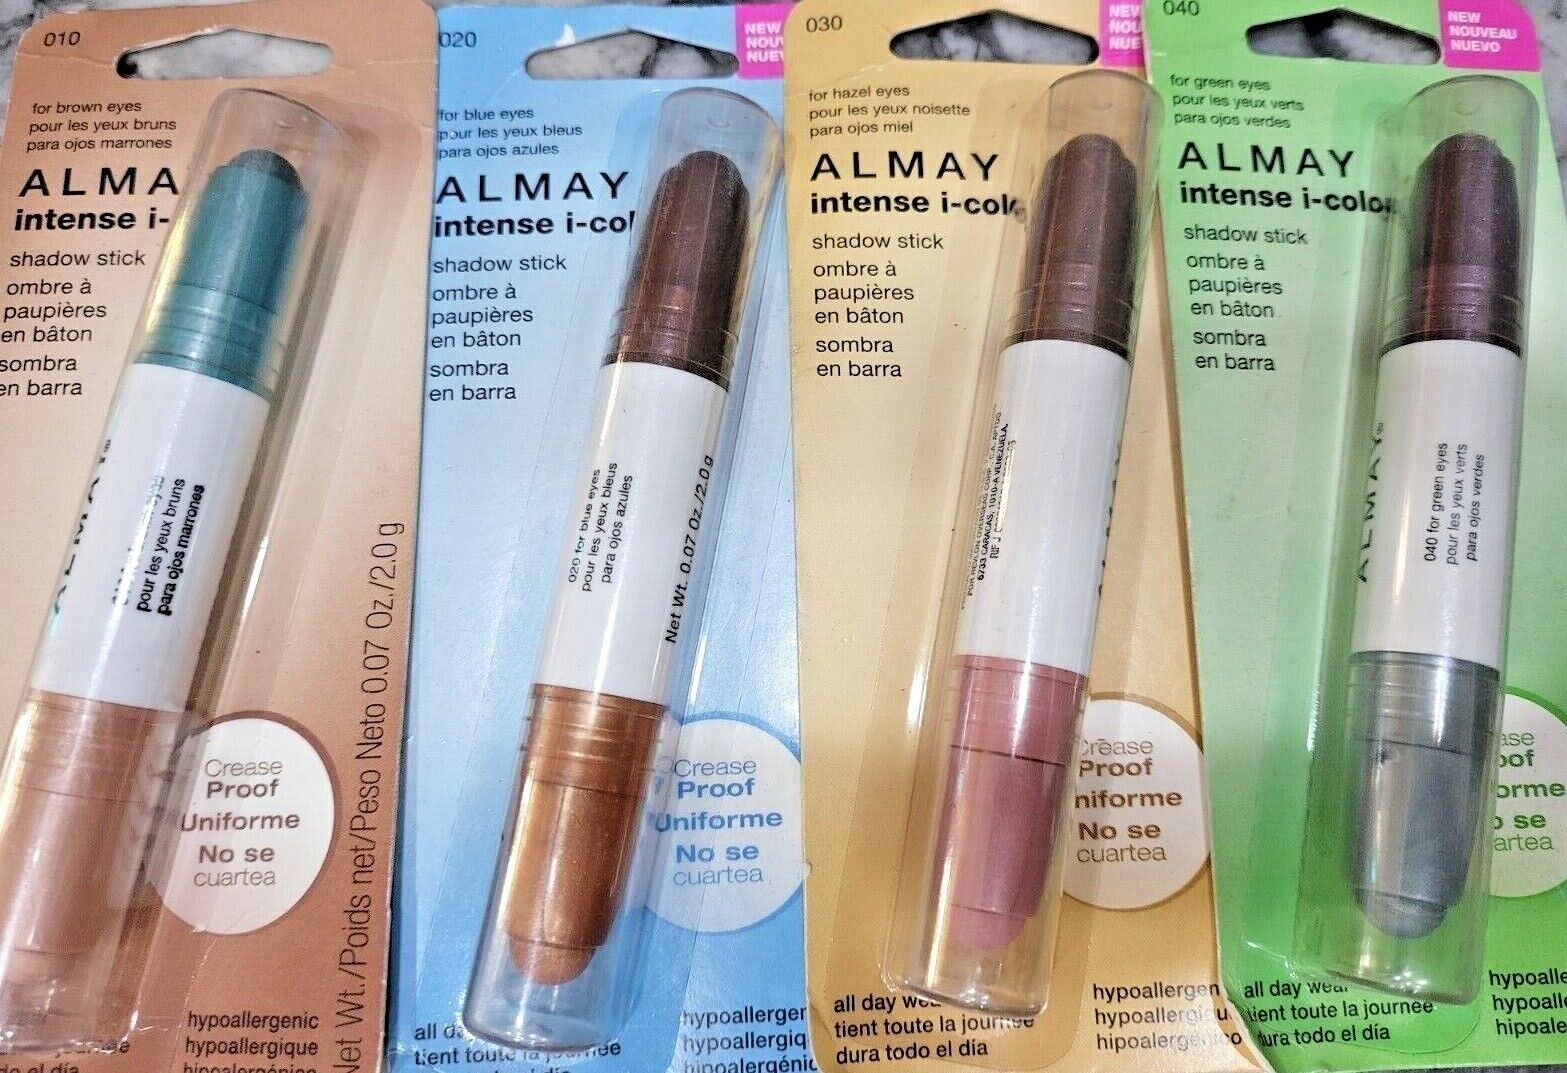 B1G1 AT 20% (Add 2) OFF Almay intense i-color Shadow Stick 010,020,030,040